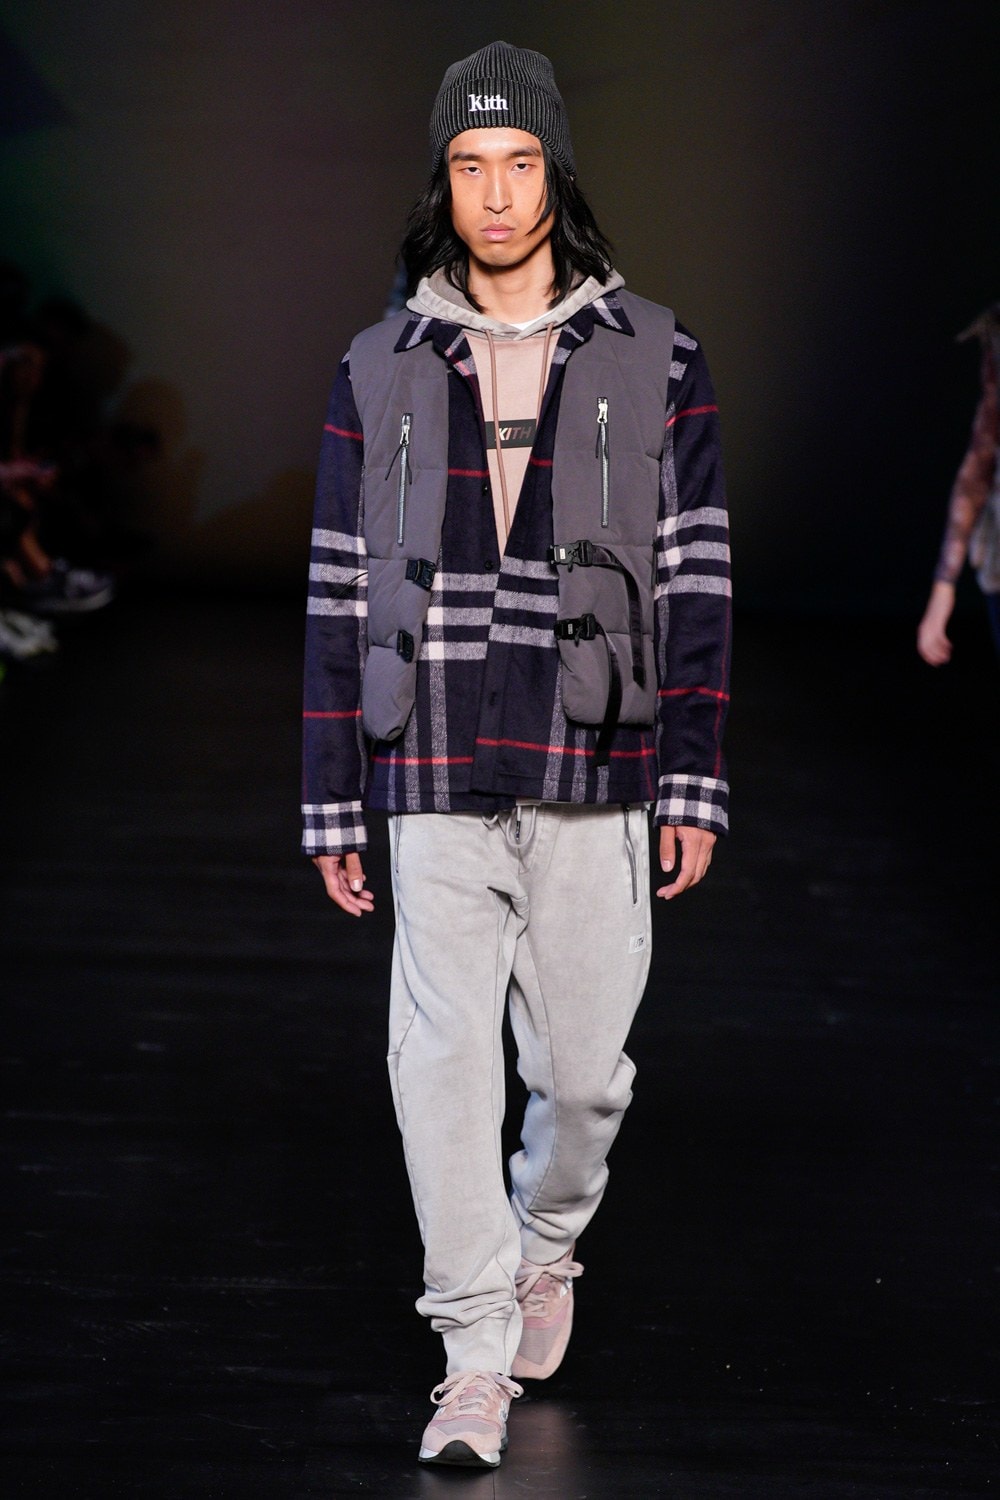 KITH Fall/Winter 2019 Runway Collection from NYFW